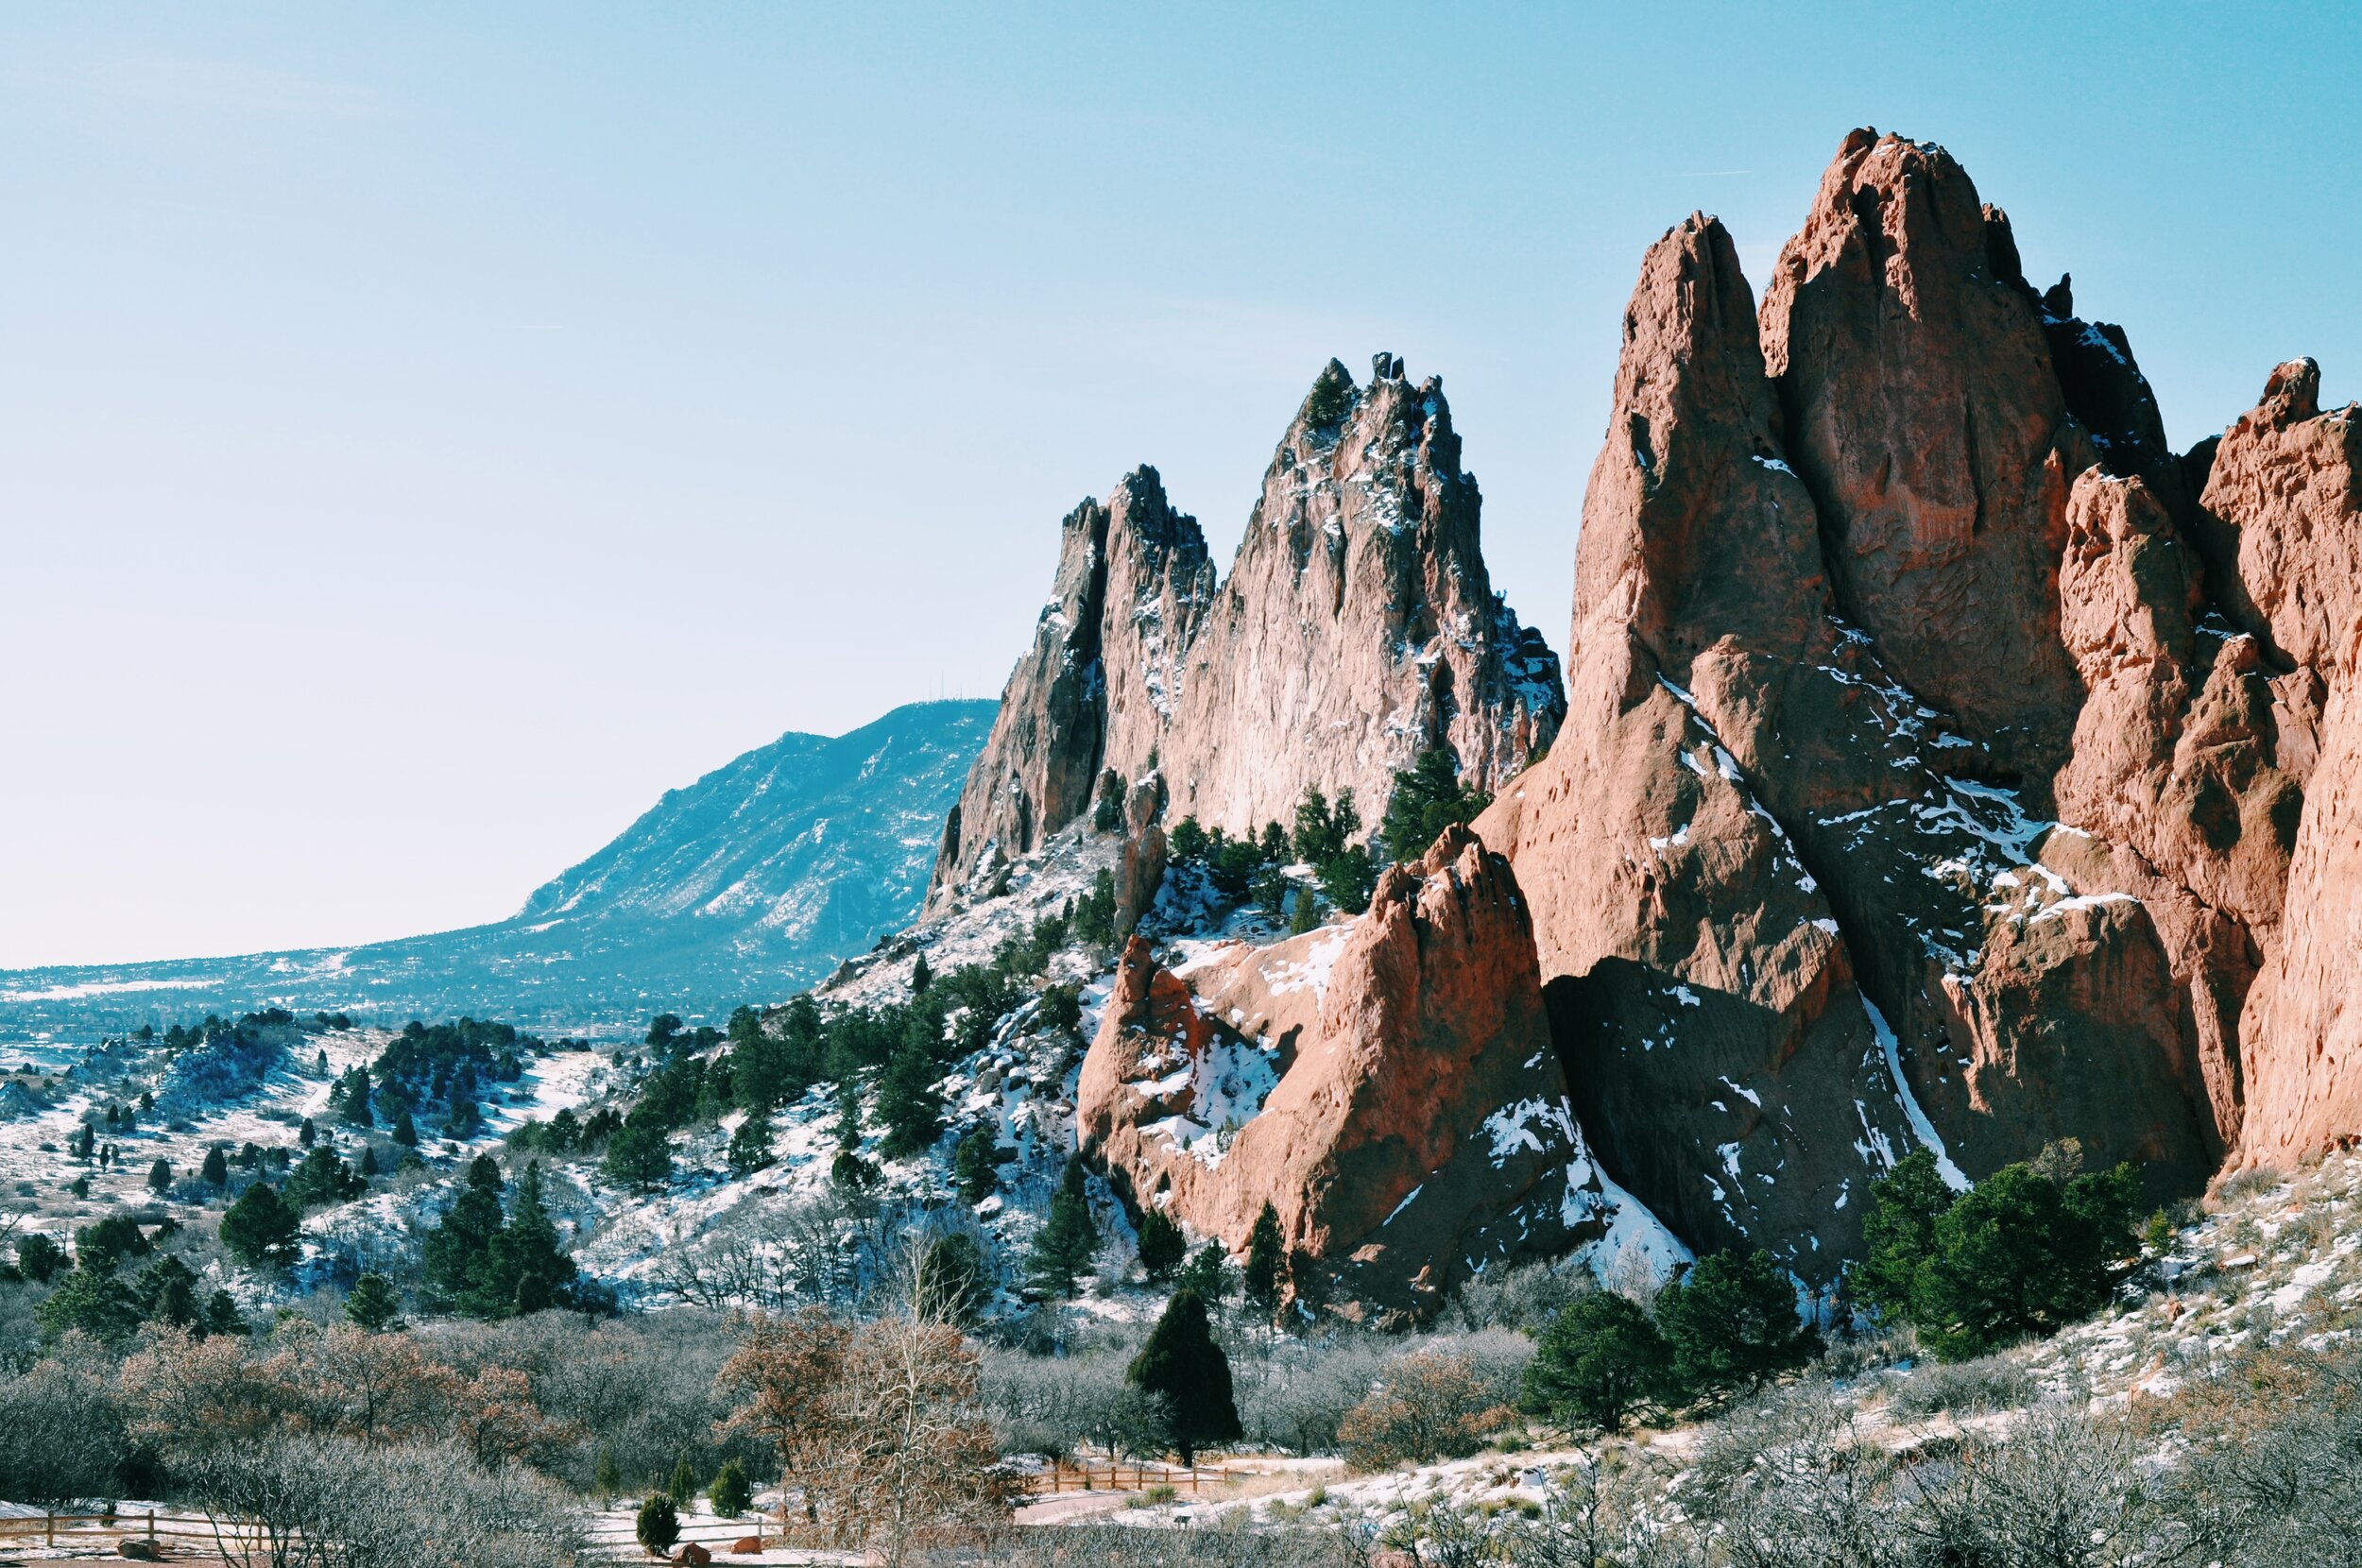 Another Garden of the Gods